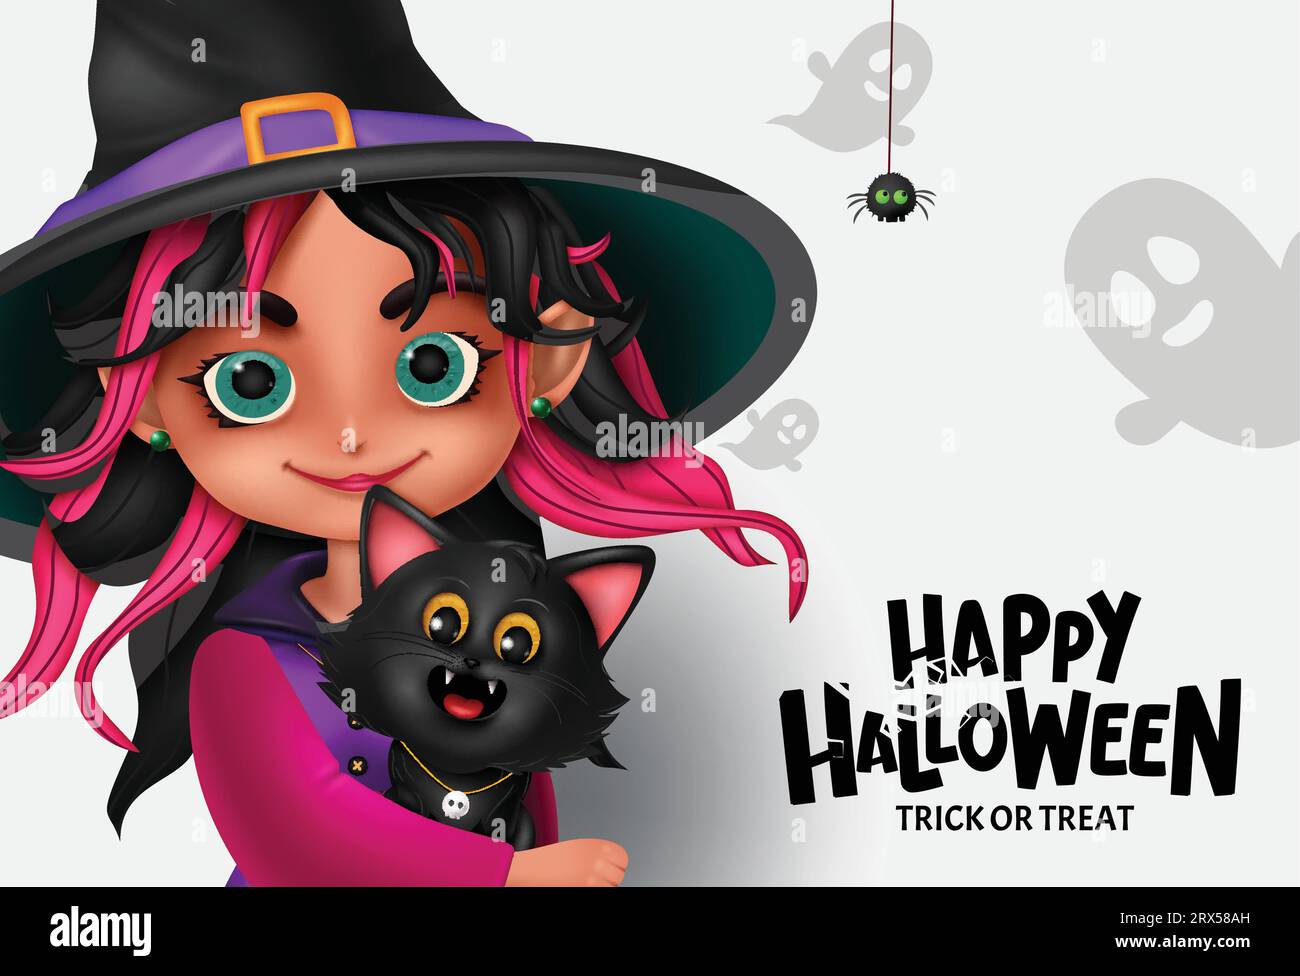 Halloween witch character vector design. Happy halloween greeting text with cute beautiful witch girl costume for kids party trick or treat Stock Vector